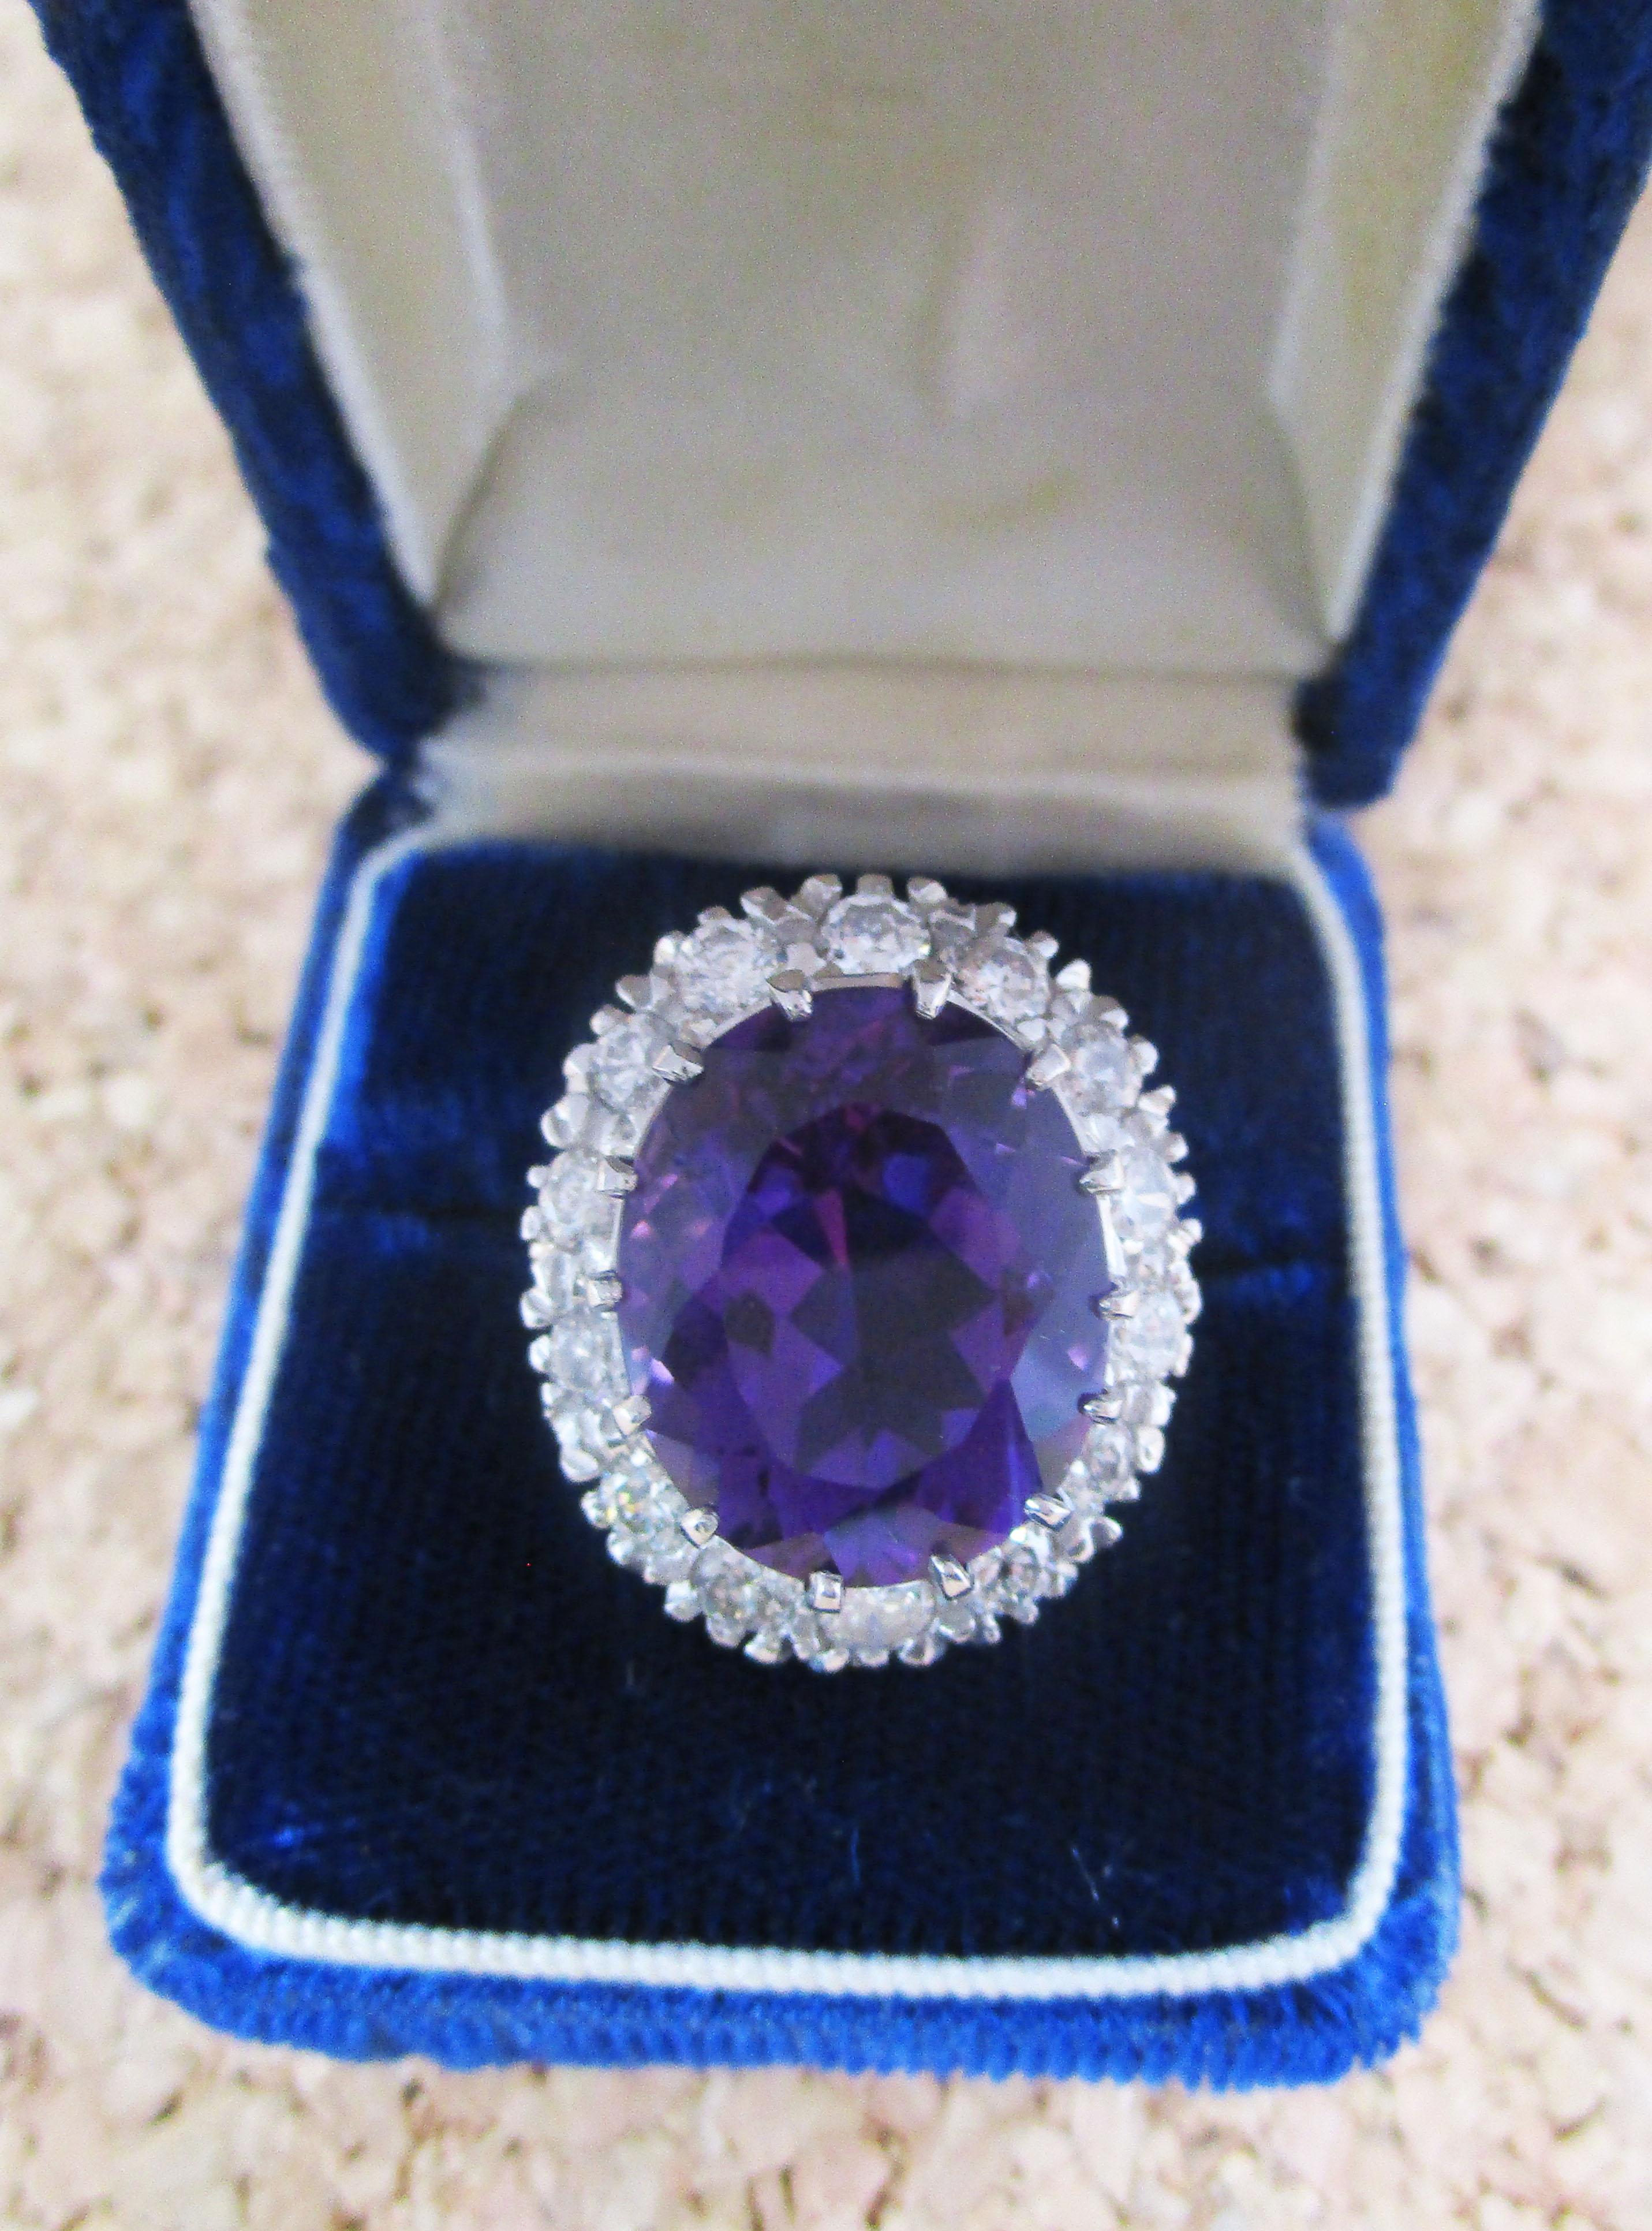 This killer ring is a stunning mid-century design in 14k yellow gold and platinum with a drop-dead gorgeous amethyst center stone framed by brilliant white diamonds. This ring is not one to go unseen-this is a ring for the woman who wants to be